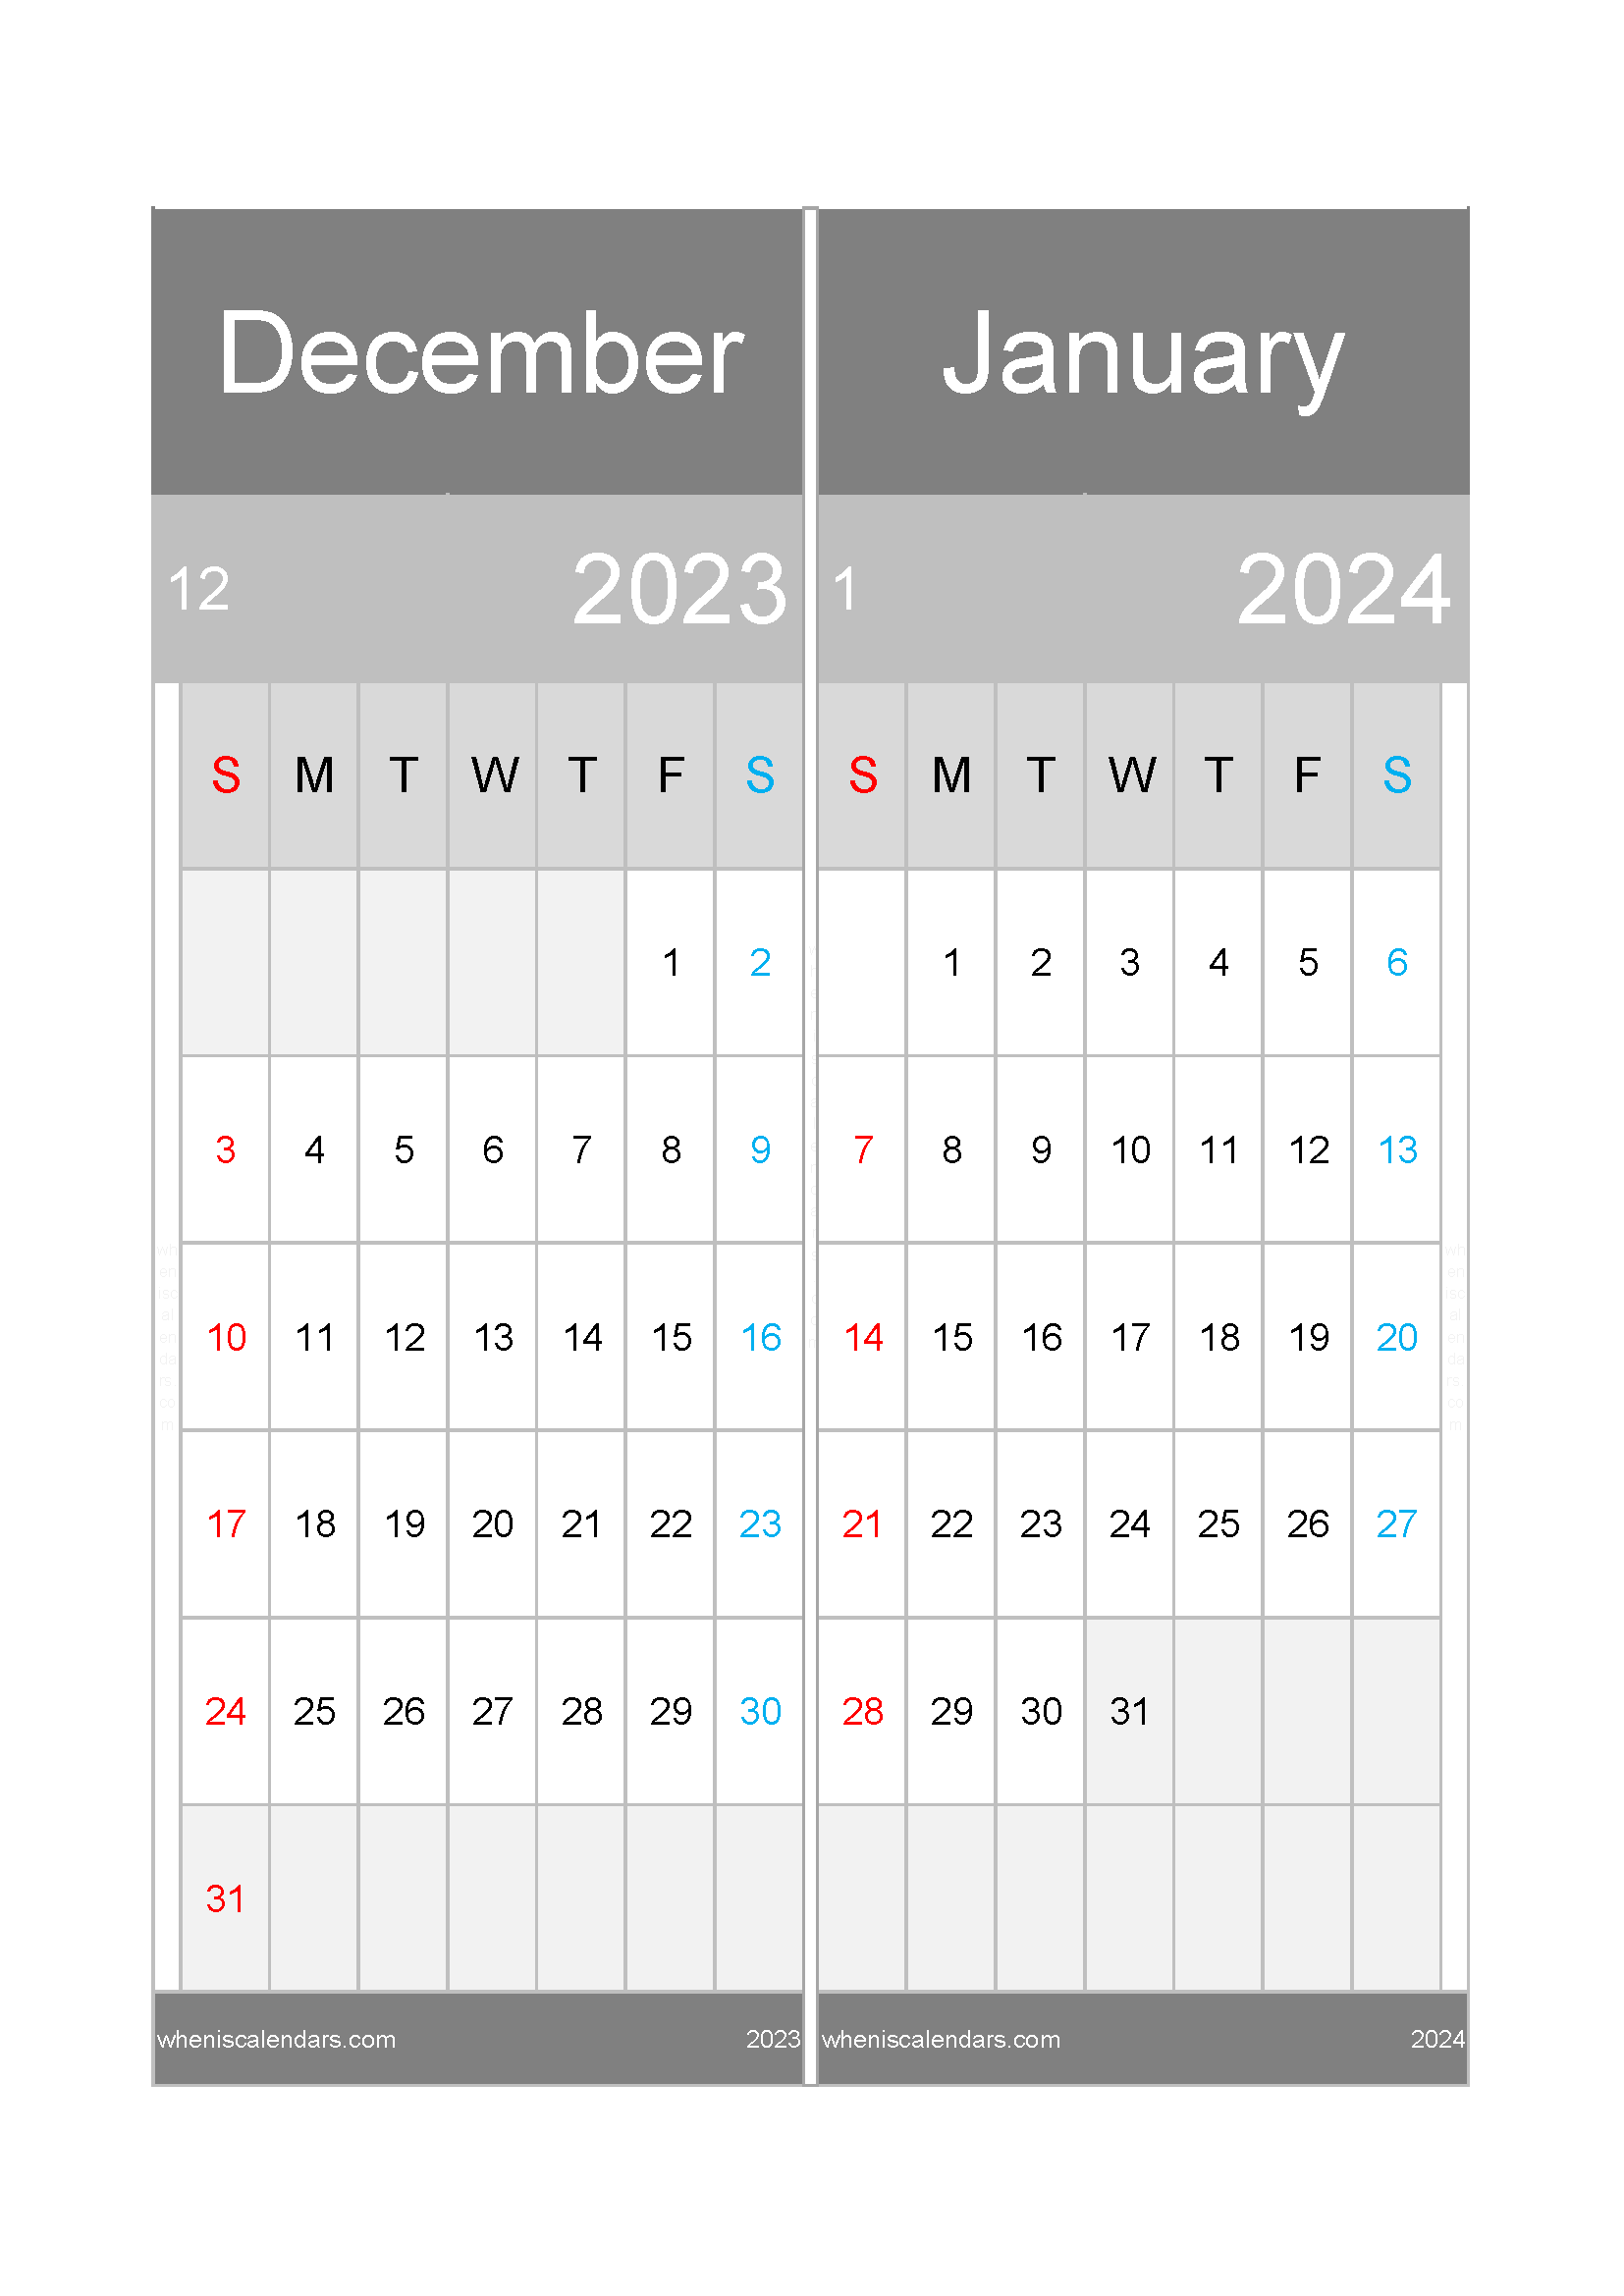 Download calendar for December 2023 and January 2024 A4 DJ23019